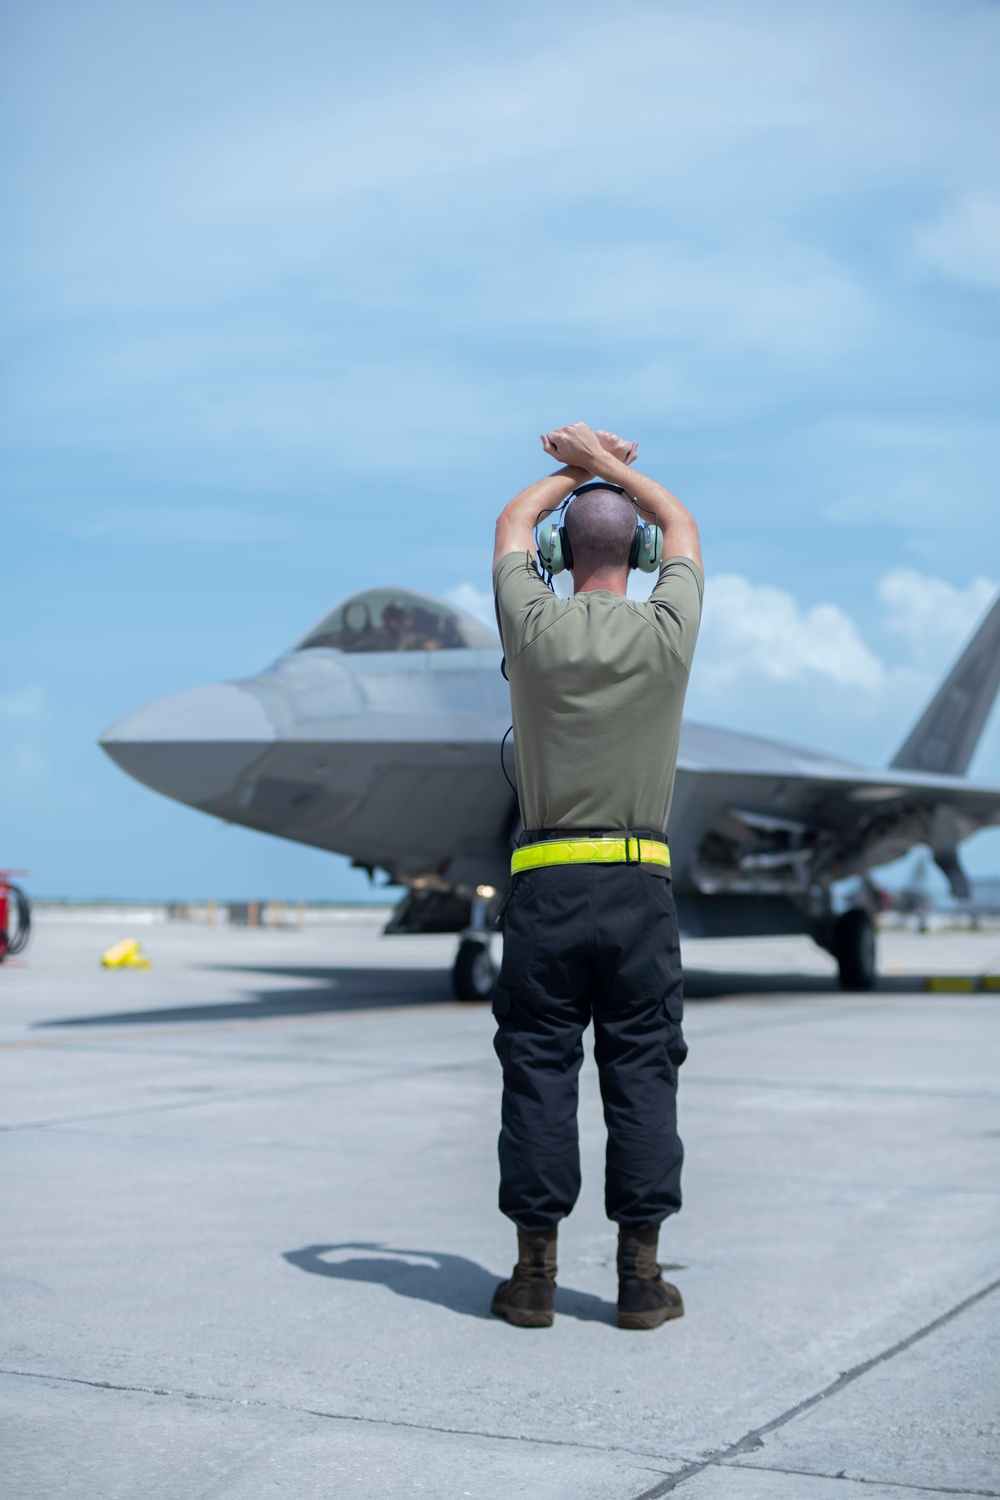 Taming a Raptor; an F-22 crew chief's mission